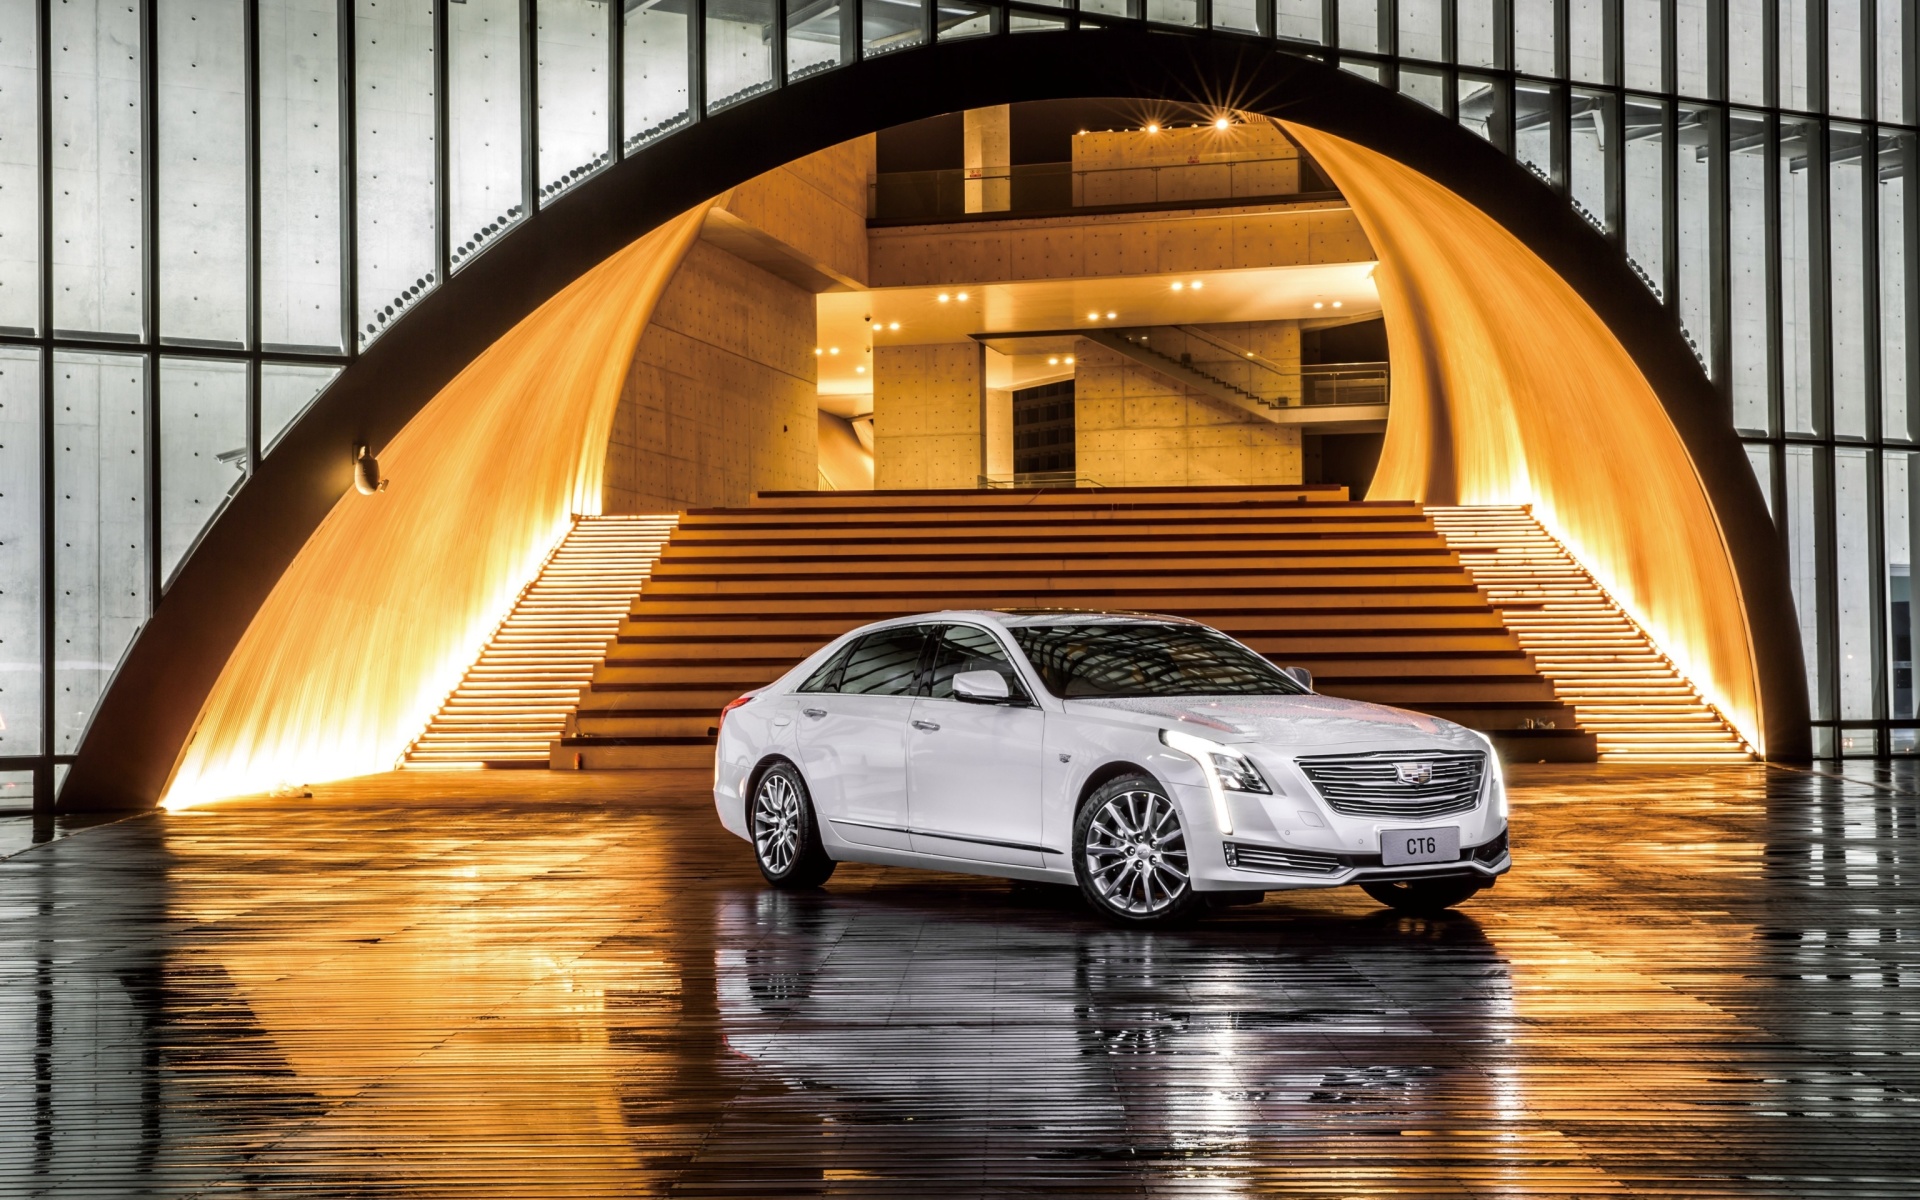 Cadillac CT6 on Auto Show wallpaper 1920x1200